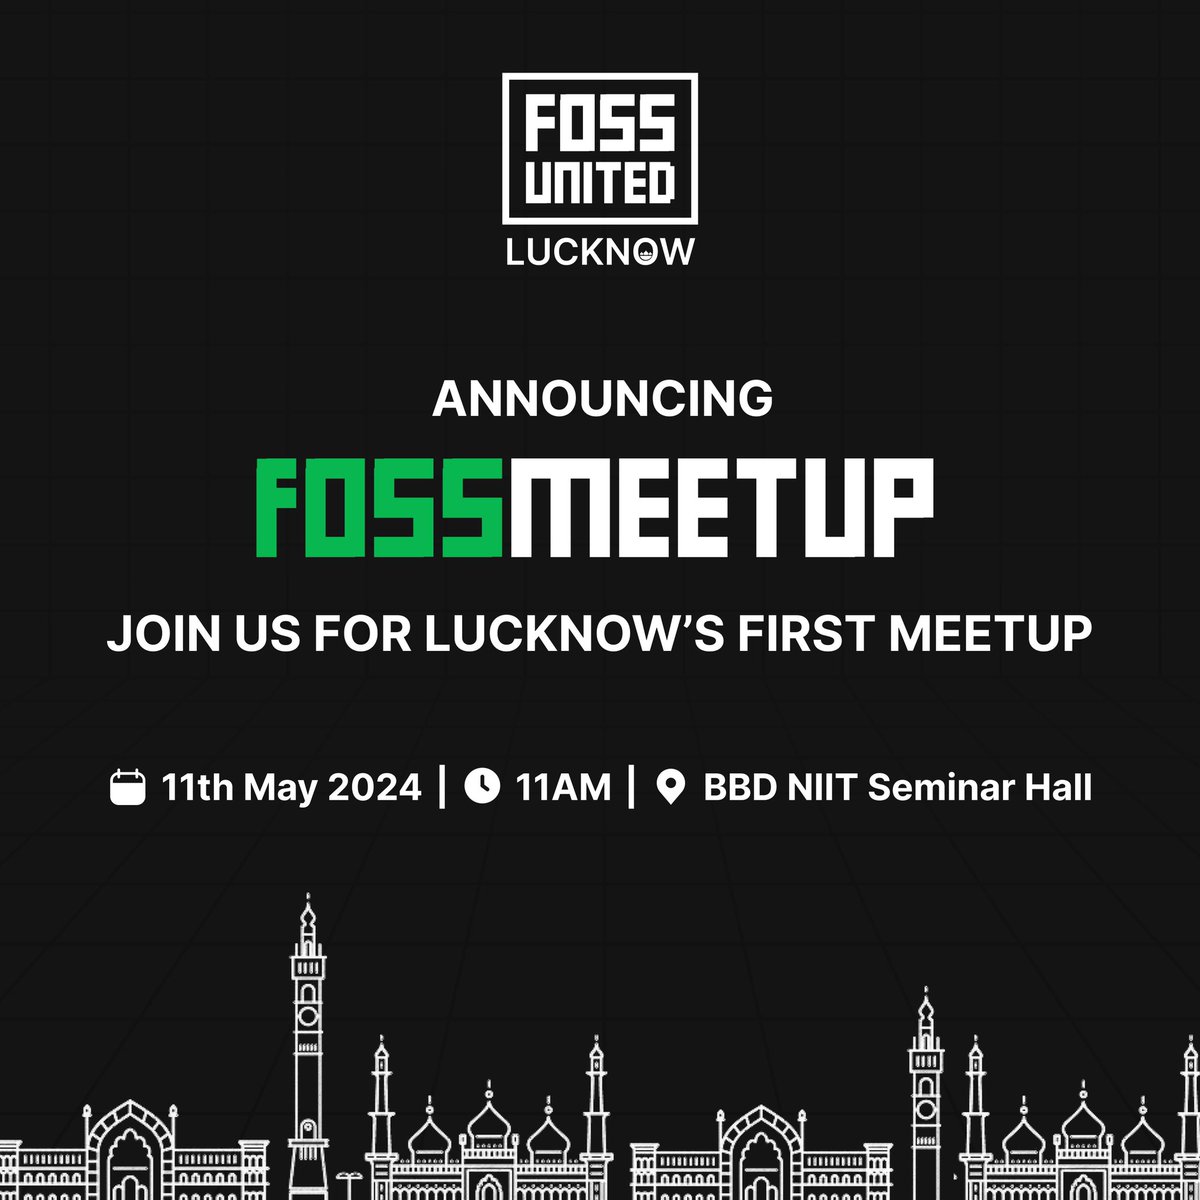 Join us on the 11th of May for our First Lucknow meet-up and share your ideas with vibrant people around at BBD NIIT Seminar hall or RSVP now to secure your spot and expand your views!

#fossmeetup #fossunited #freeandopensourcesoftware #lucknow #lucknowmeetup #niitlucknow #foss